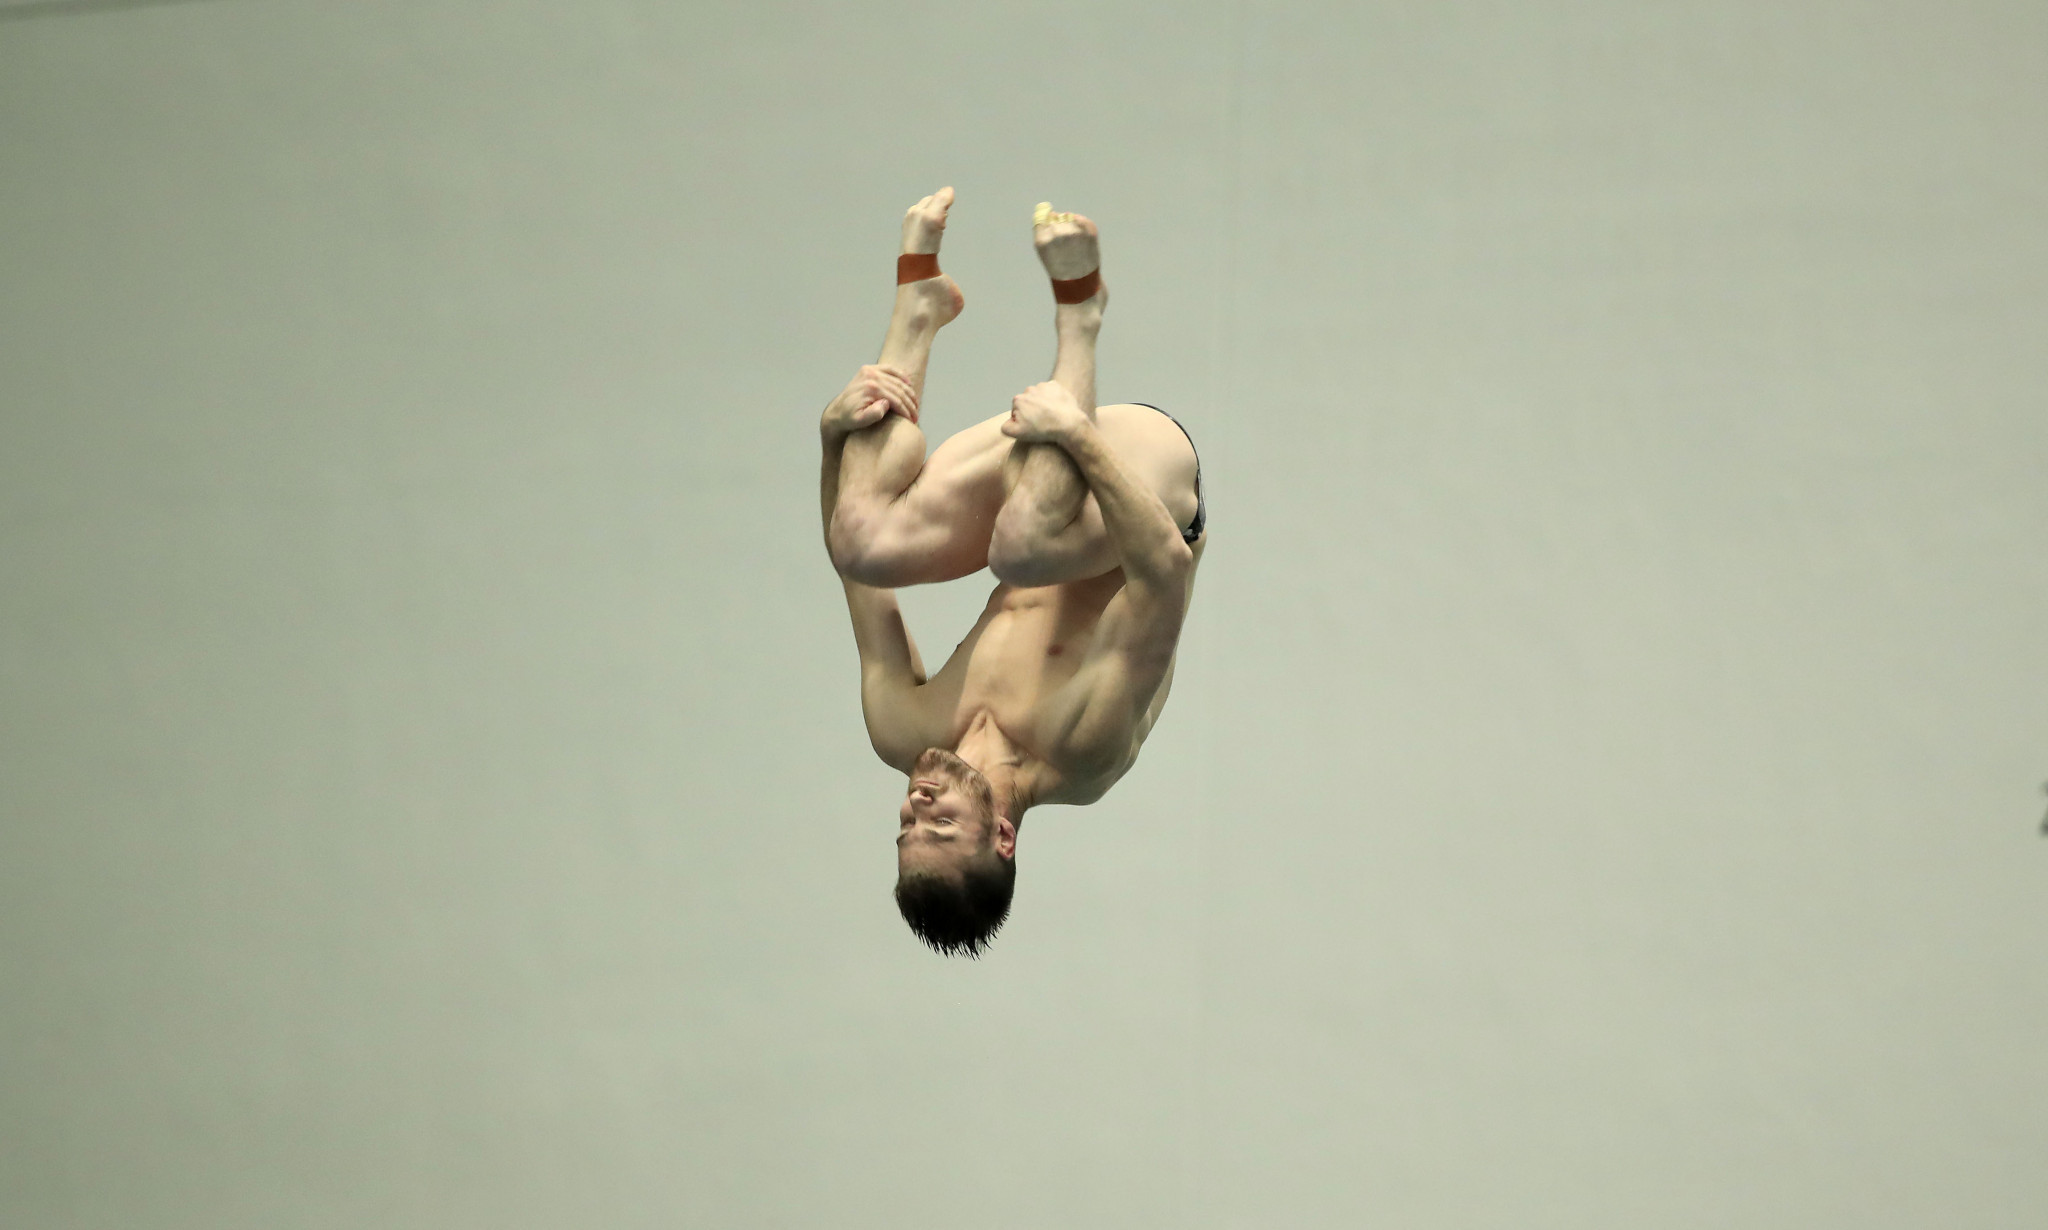 London 2012 champion David Boudia will also compete in Montreal ©Getty Images